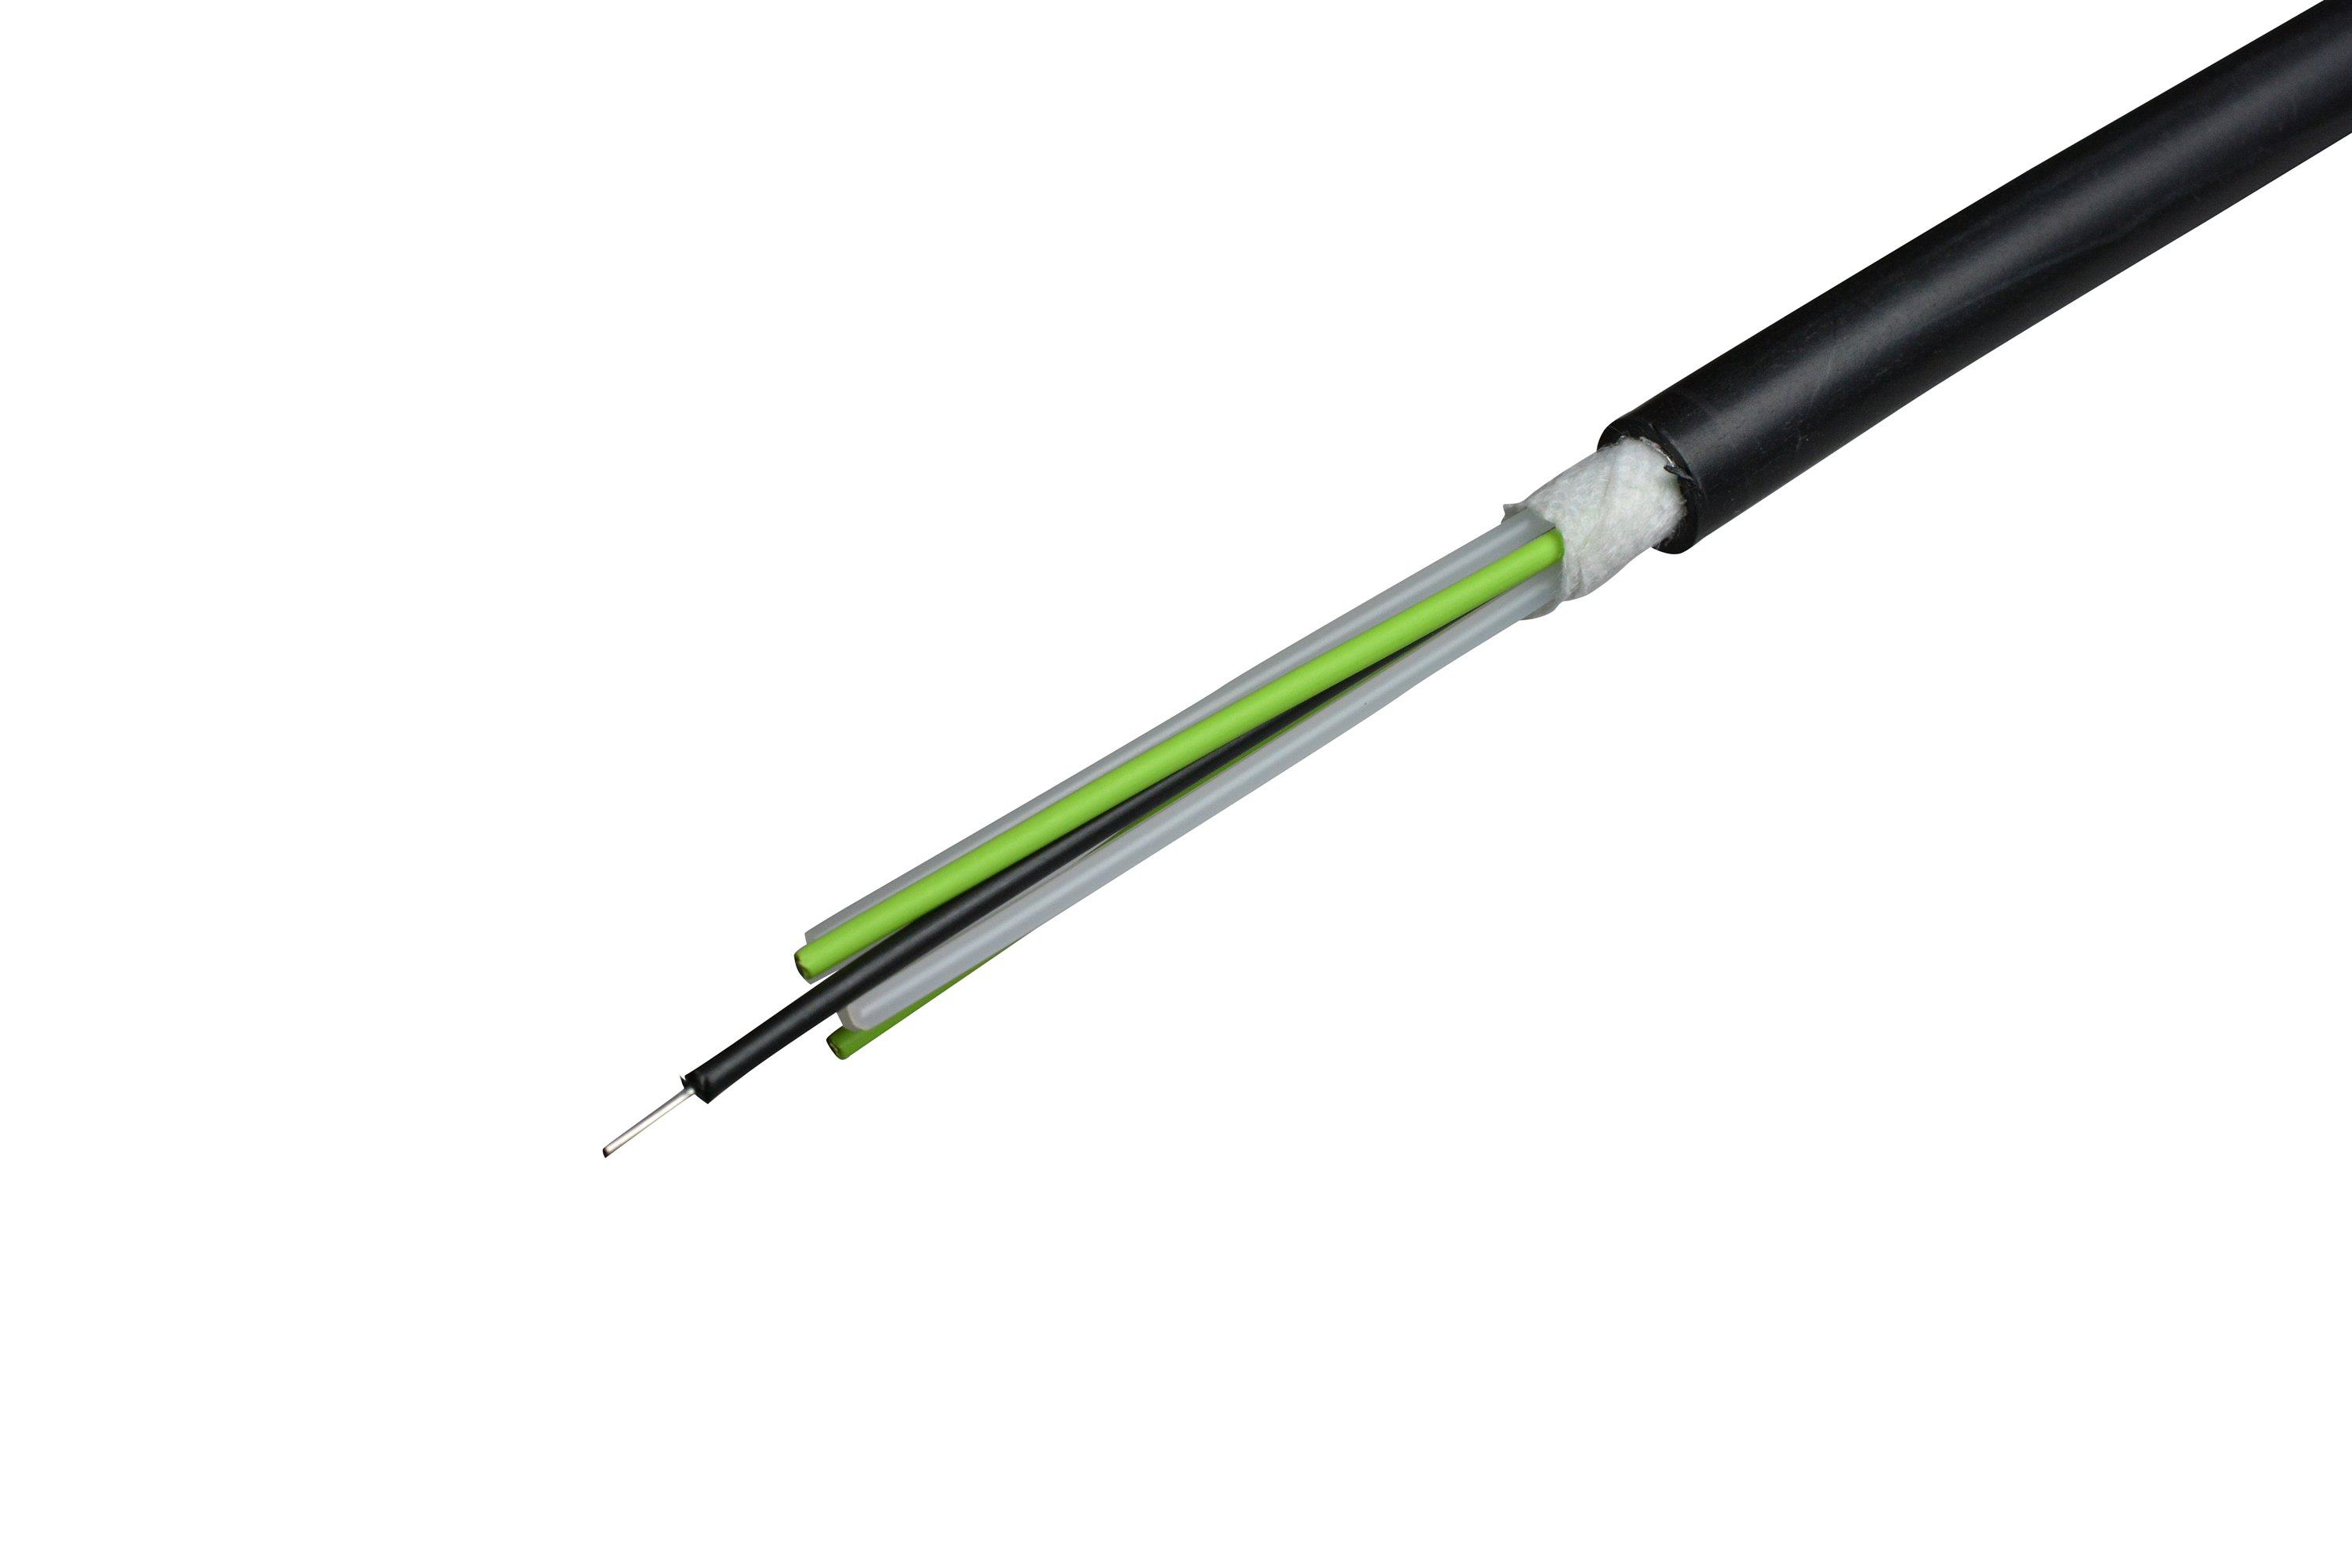 2cores,OS2,Unitized Round Type Fiber Optic Cable for Indoor and OutdoorUse.